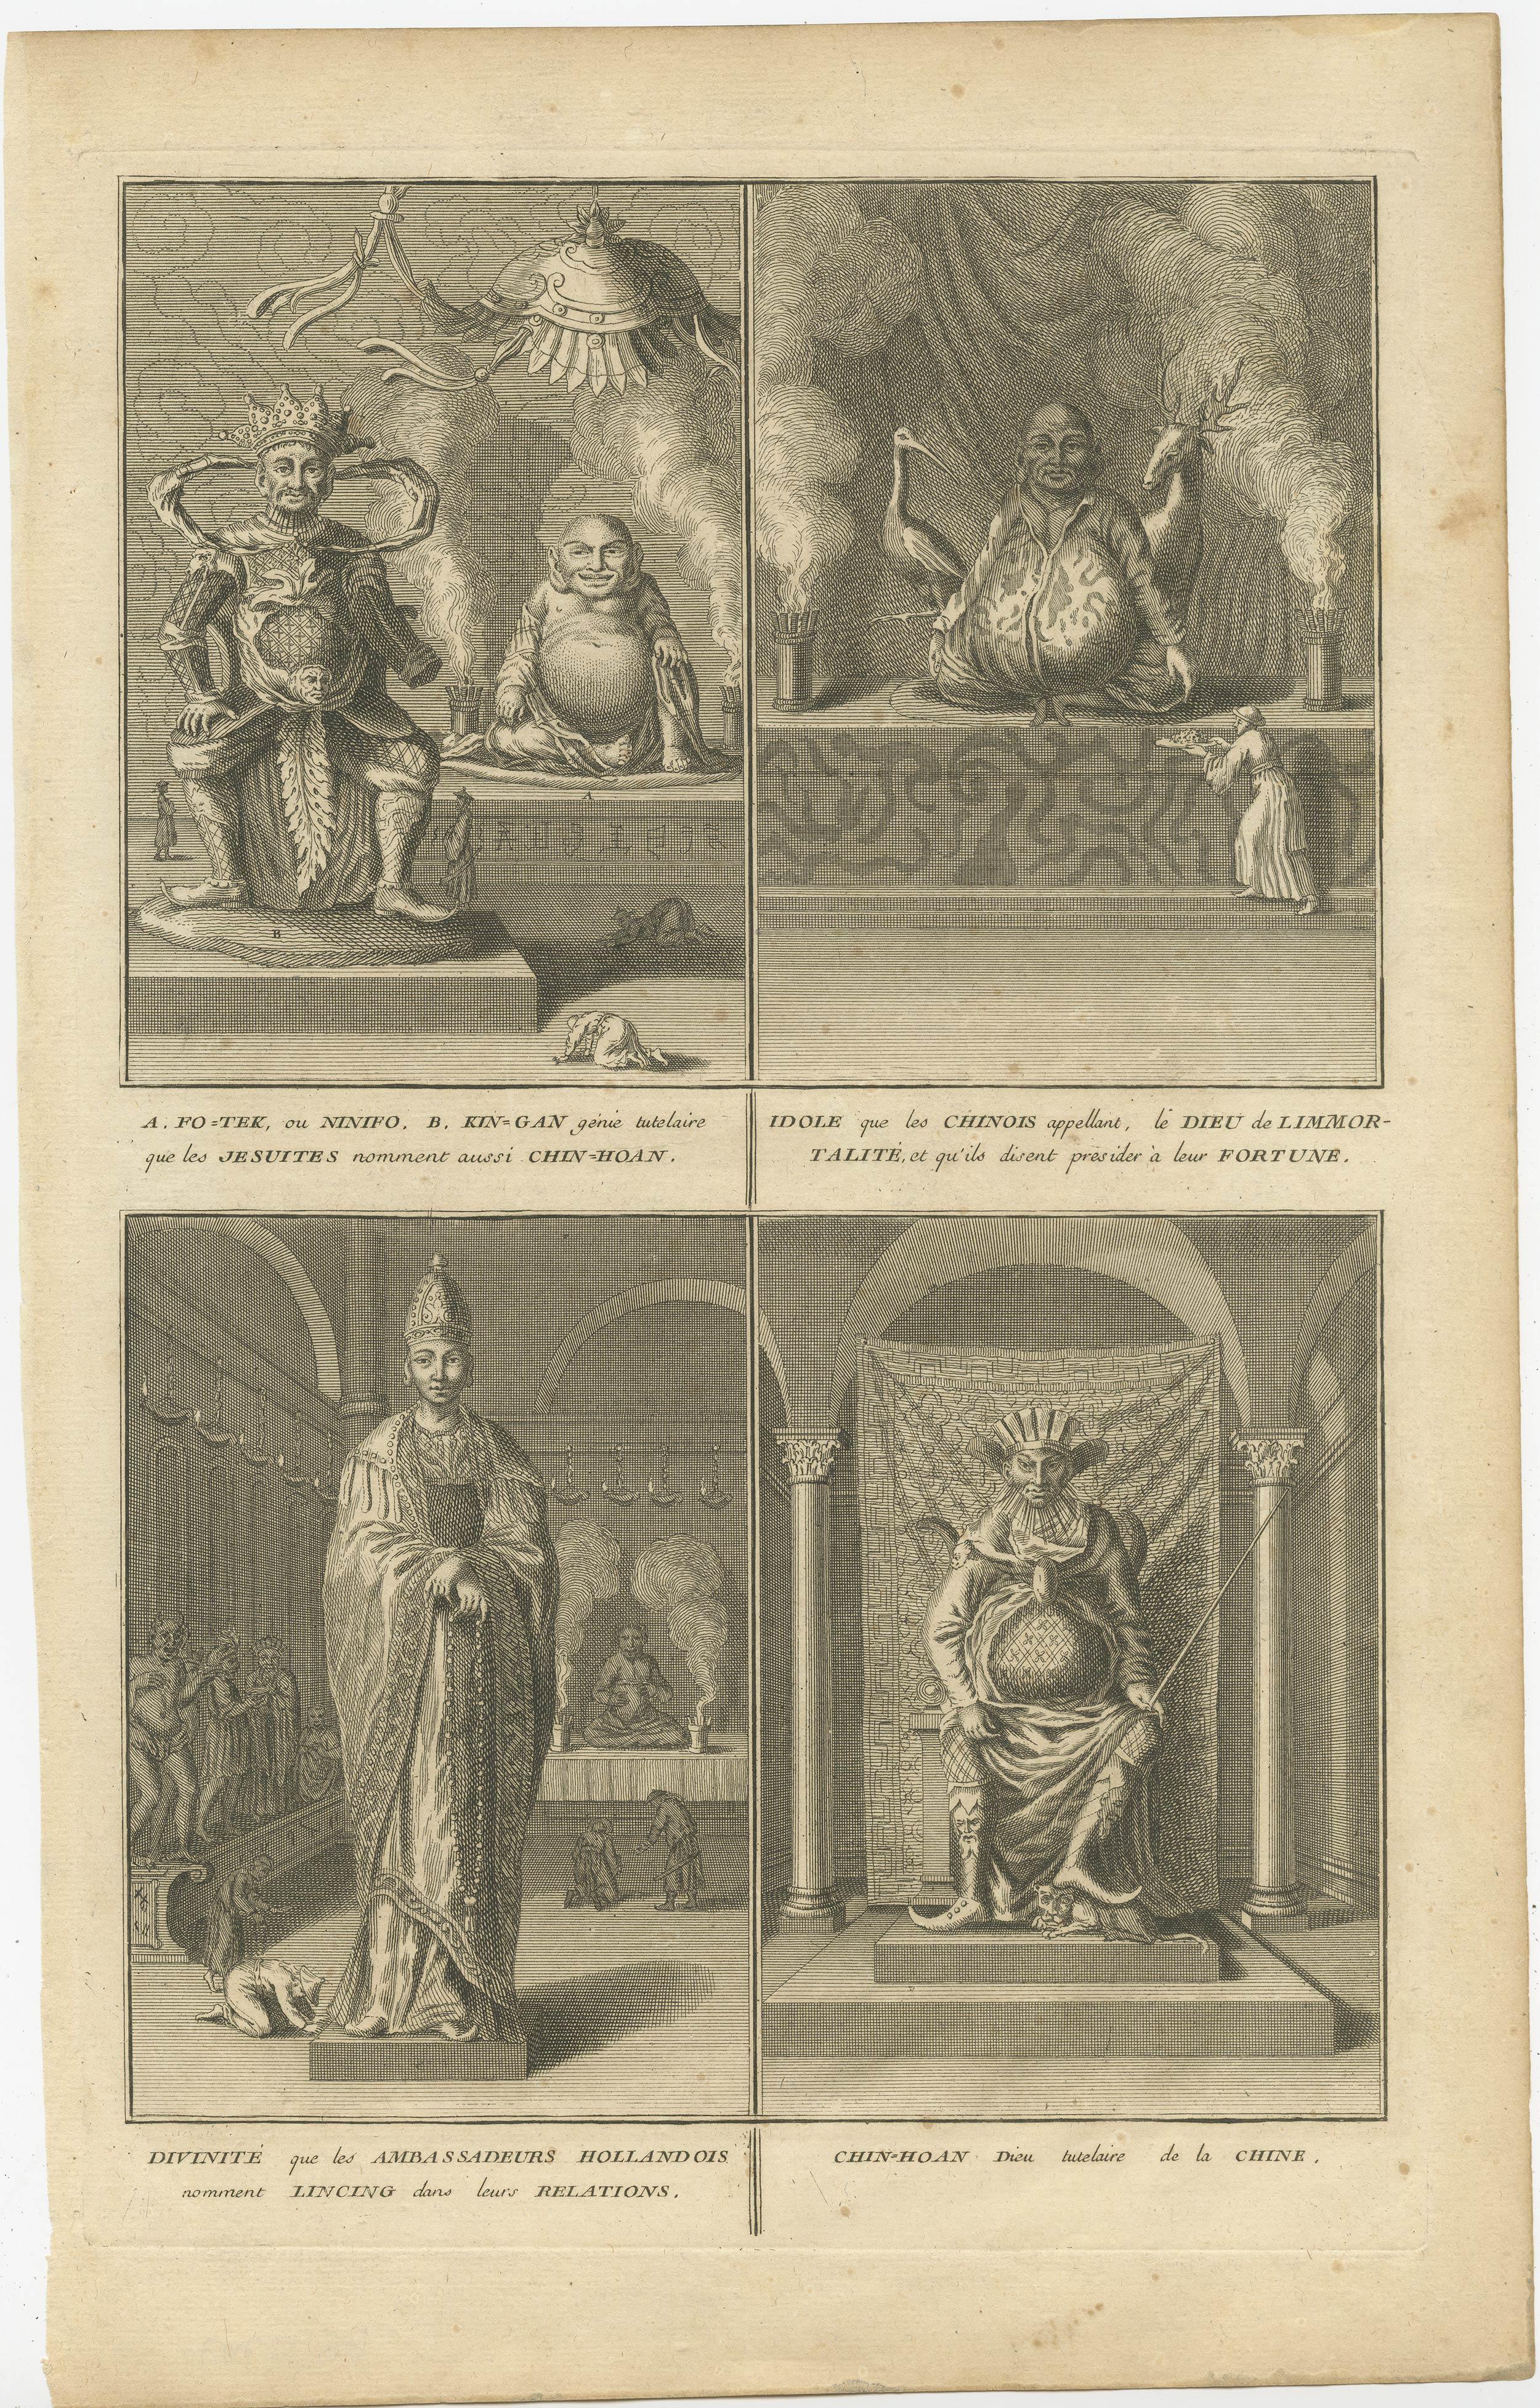 Antique print titled 'Fo-Tek ou Ninifo (..)'. Four images on one sheet. The two upper images show the Chinese God of Immortality and Fo-Tek or Ninifo and King-gan or Chin-hoan. The two lower images show 1) Chin-Hoan, Guardian Deity of China, 2) A